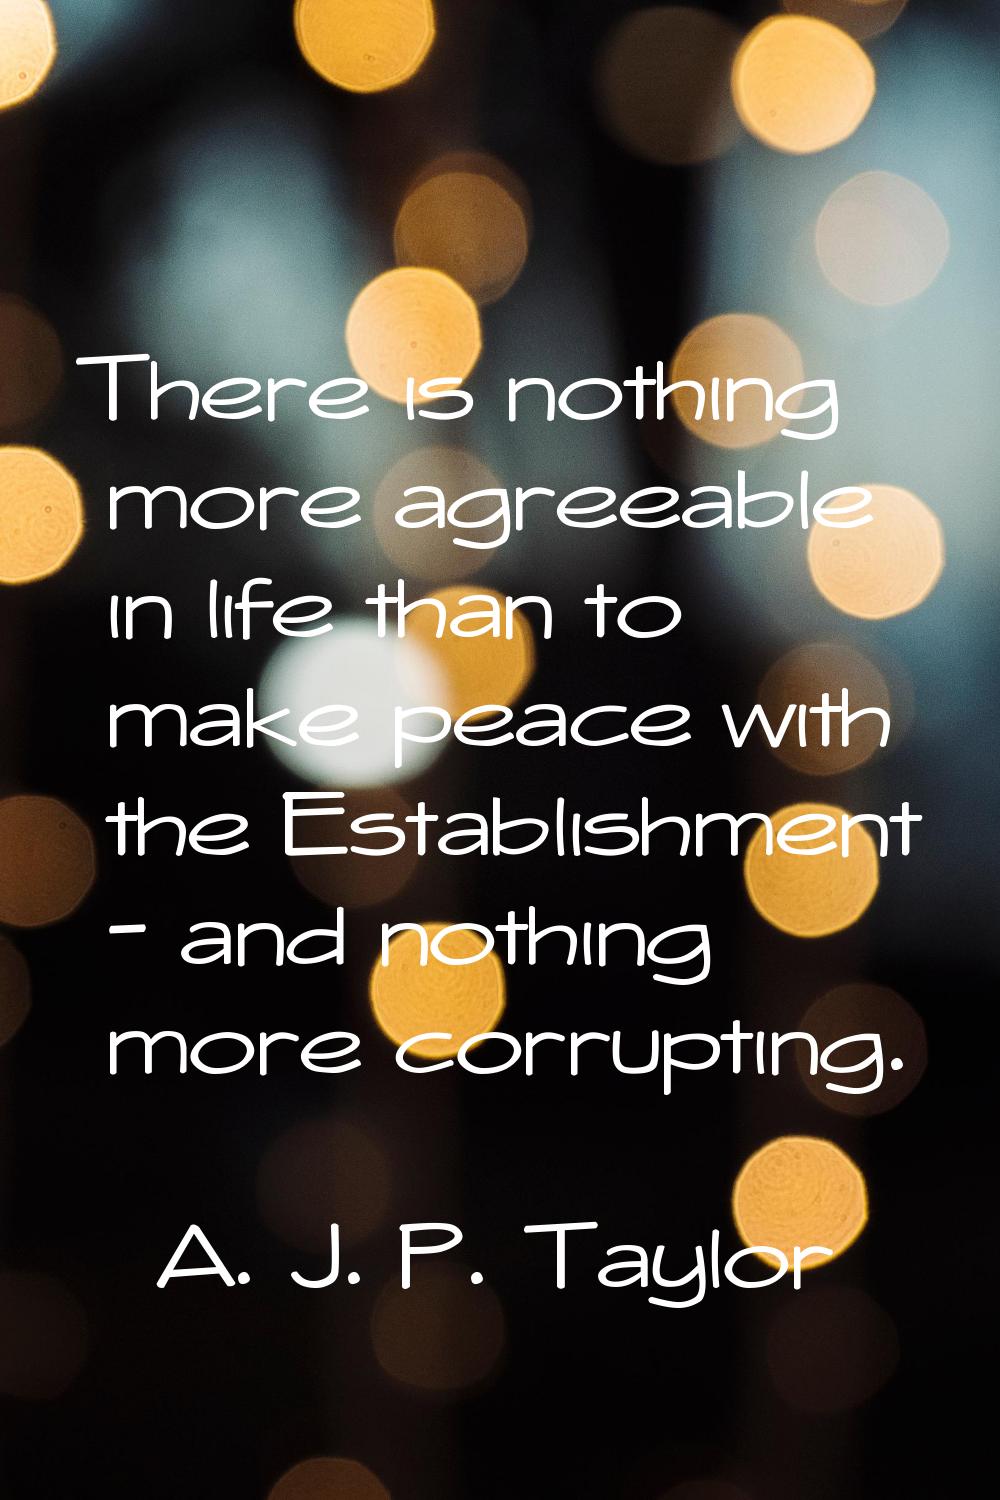 There is nothing more agreeable in life than to make peace with the Establishment - and nothing mor